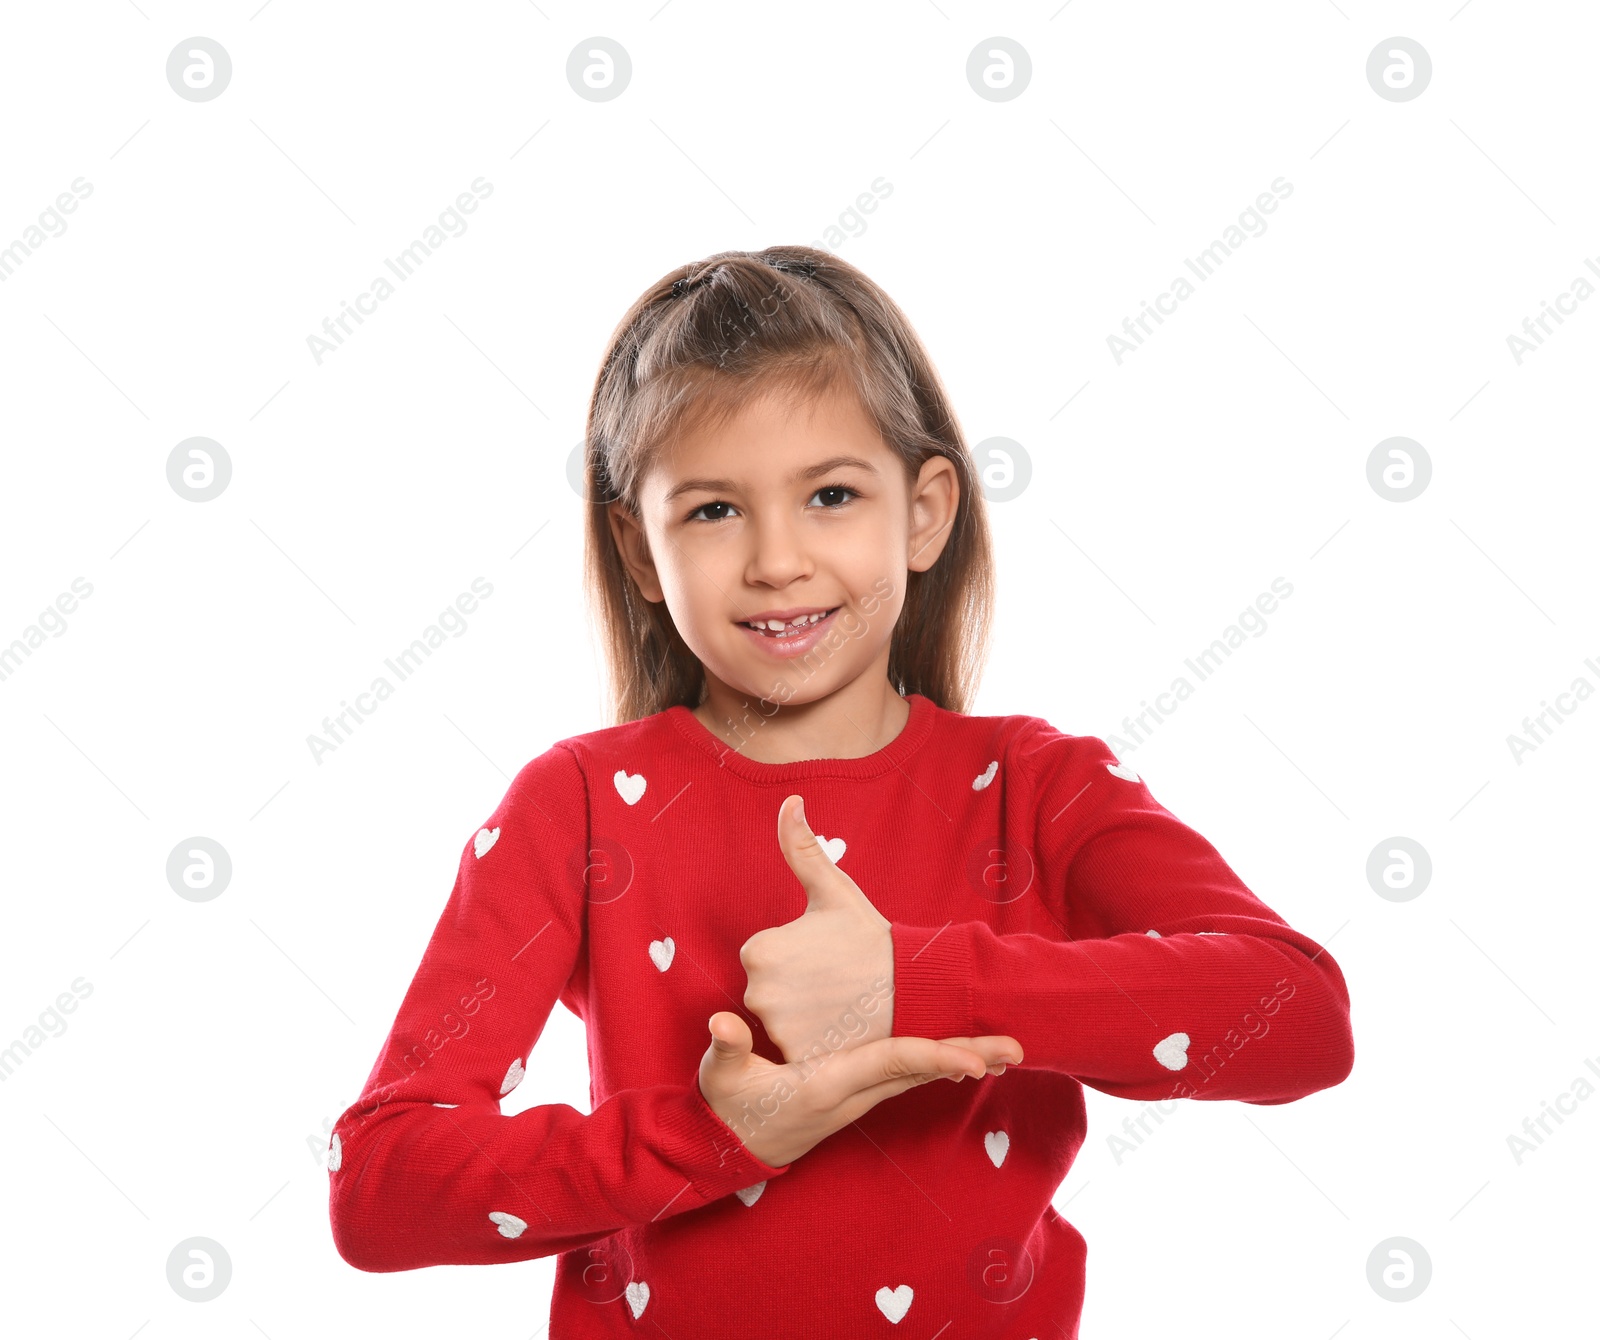 Photo of Little girl showing HELP gesture in sign language on white background